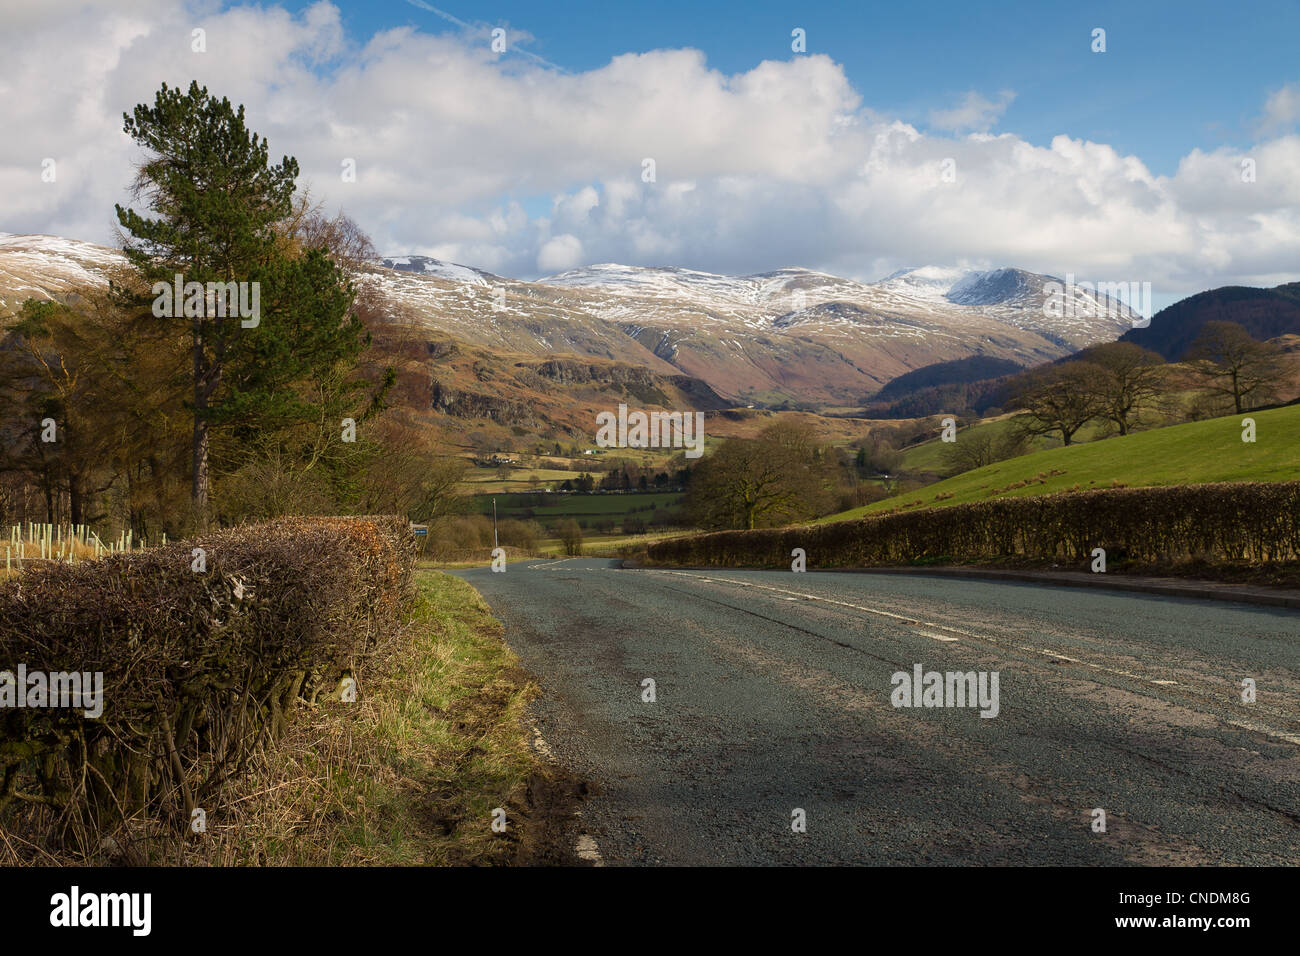 Looking South East  on A591 near Castlerigg, Cumbria, UK Stock Photo